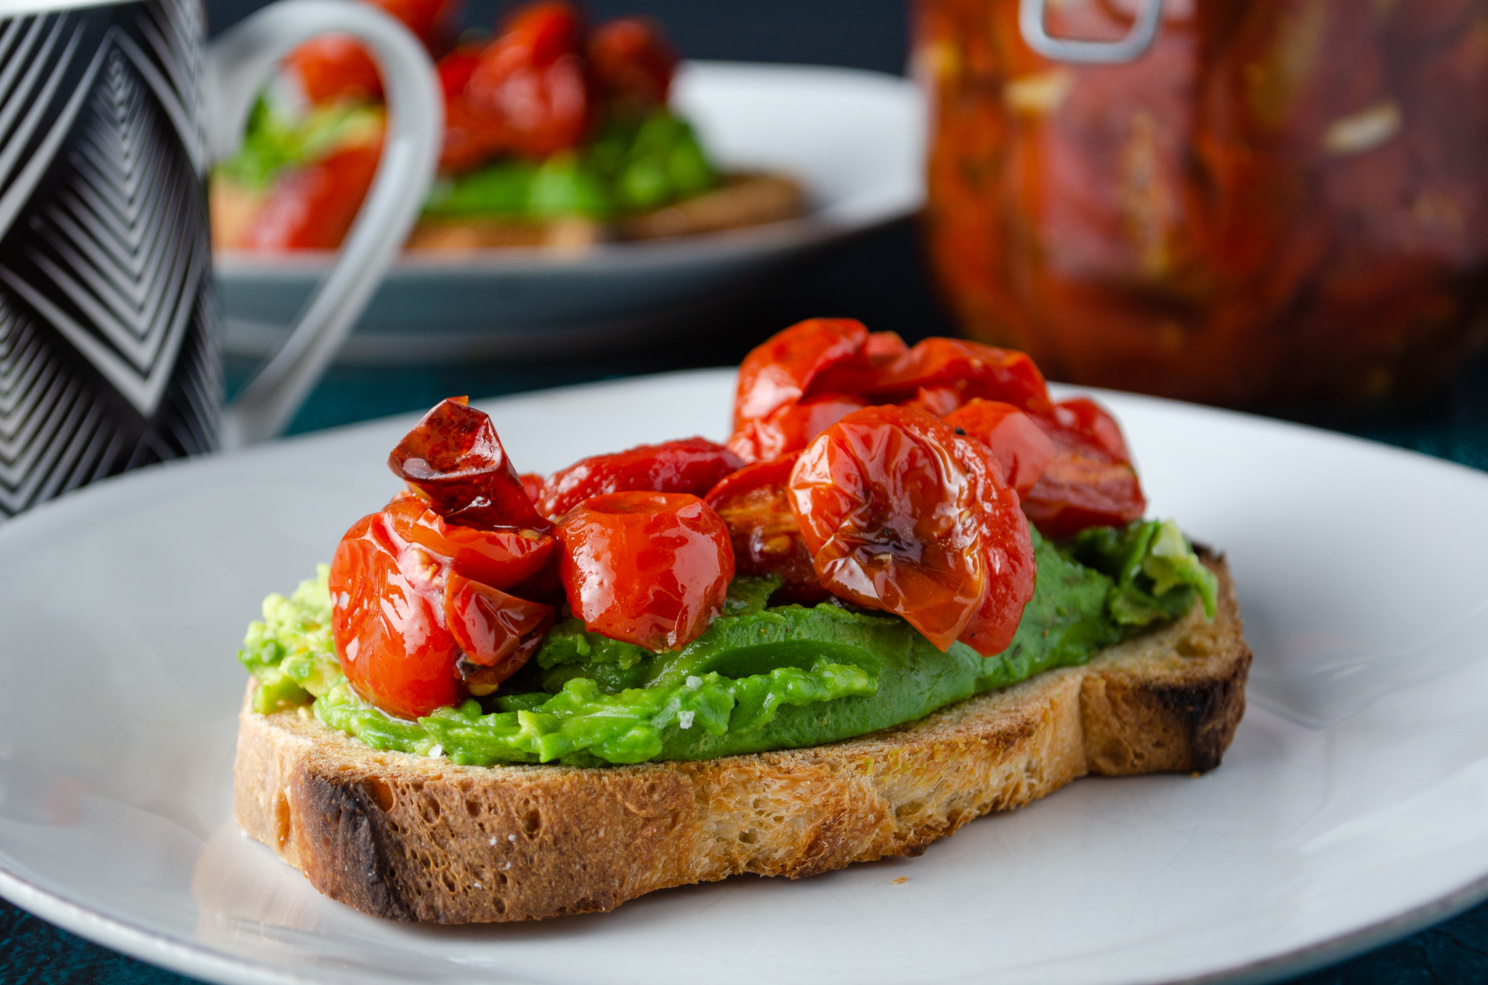 Hearty European style bread sliced and toasted with mashed avocado and roasted cherry tomato confit